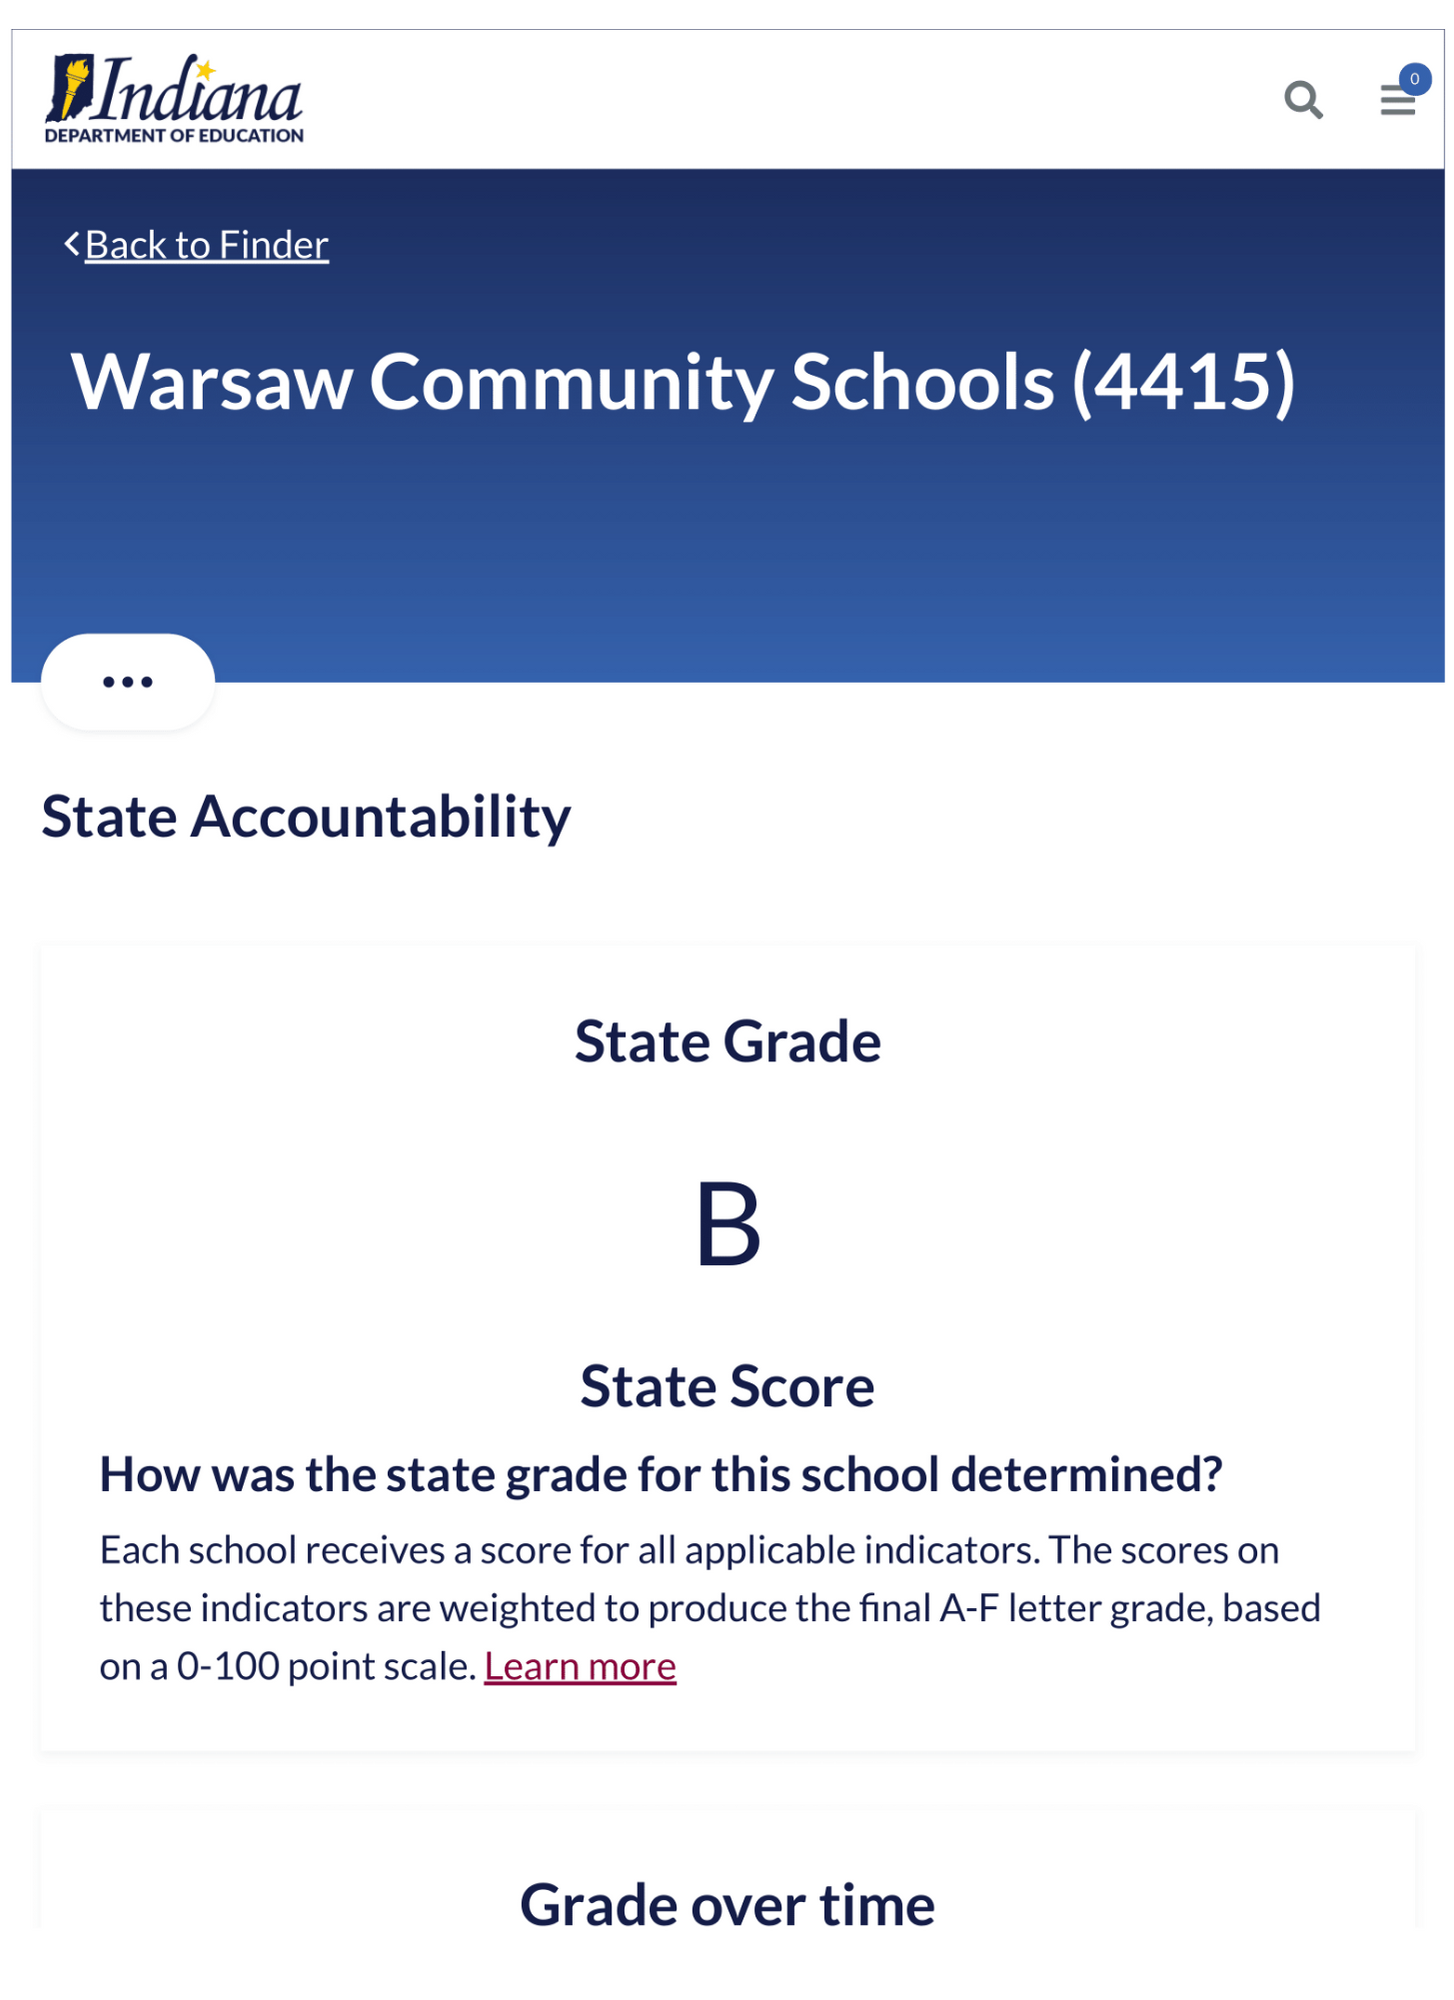 Warsaw Community Schools 4415 State Grade B State Score How was the state grade for this school determined? Each school receives a score for all applicable indicators. The scores on these indicators are weighted to produce the final A-F letter grade, based on a 0-100 point scale. Grade over time